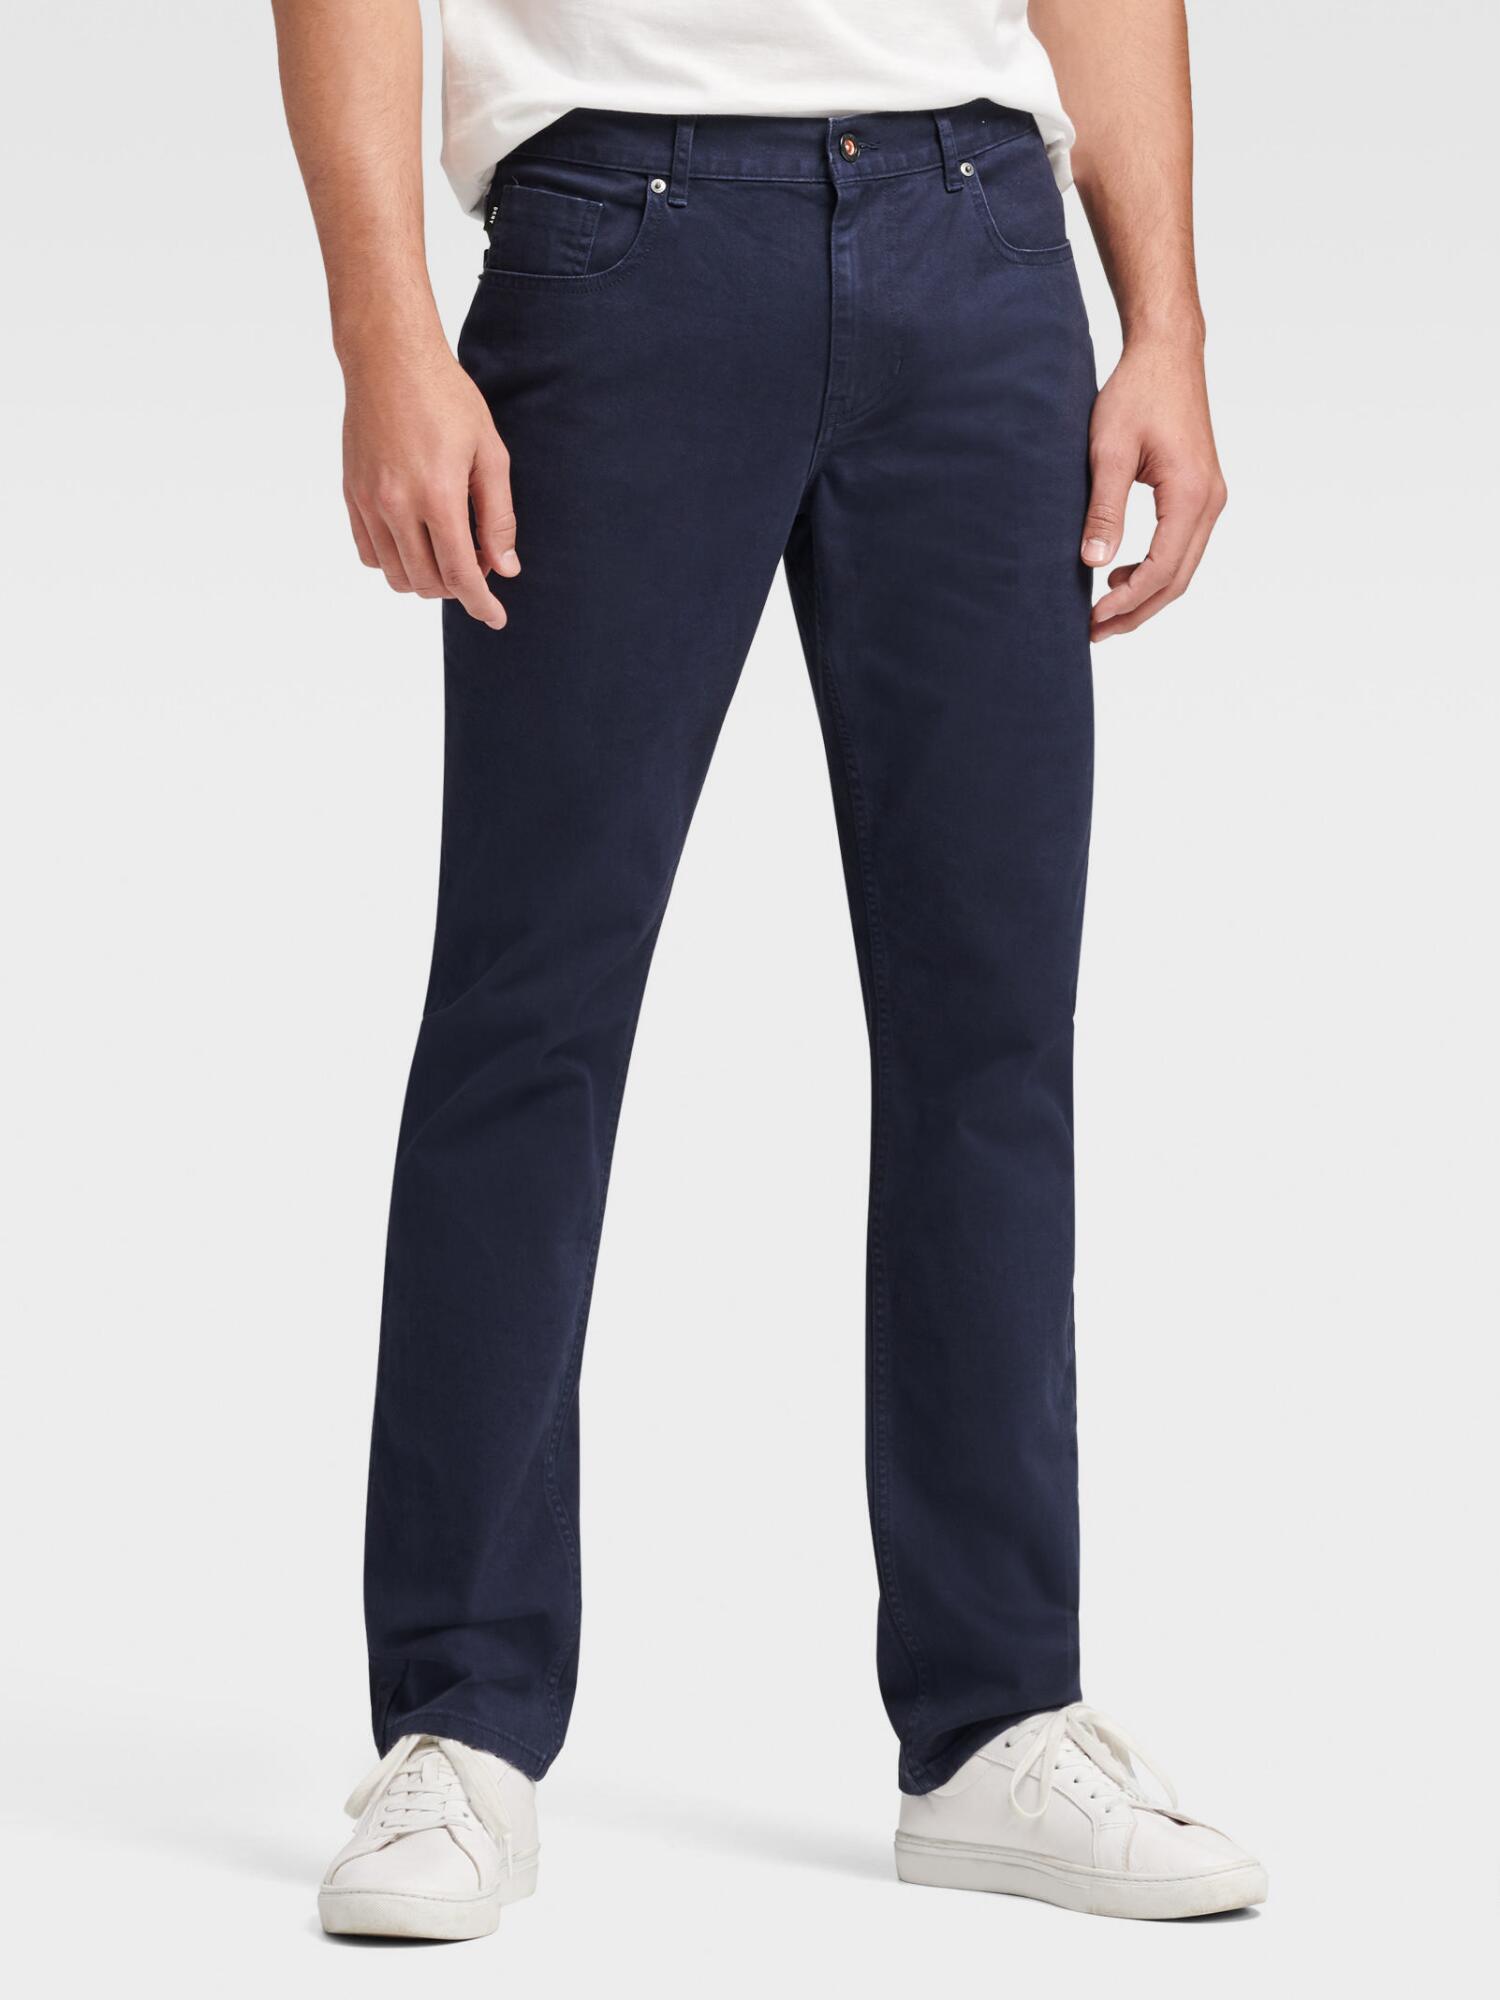 DKNY Cotton Twill 5-pocket Pant in Navy (Blue) for Men - Save 63% - Lyst